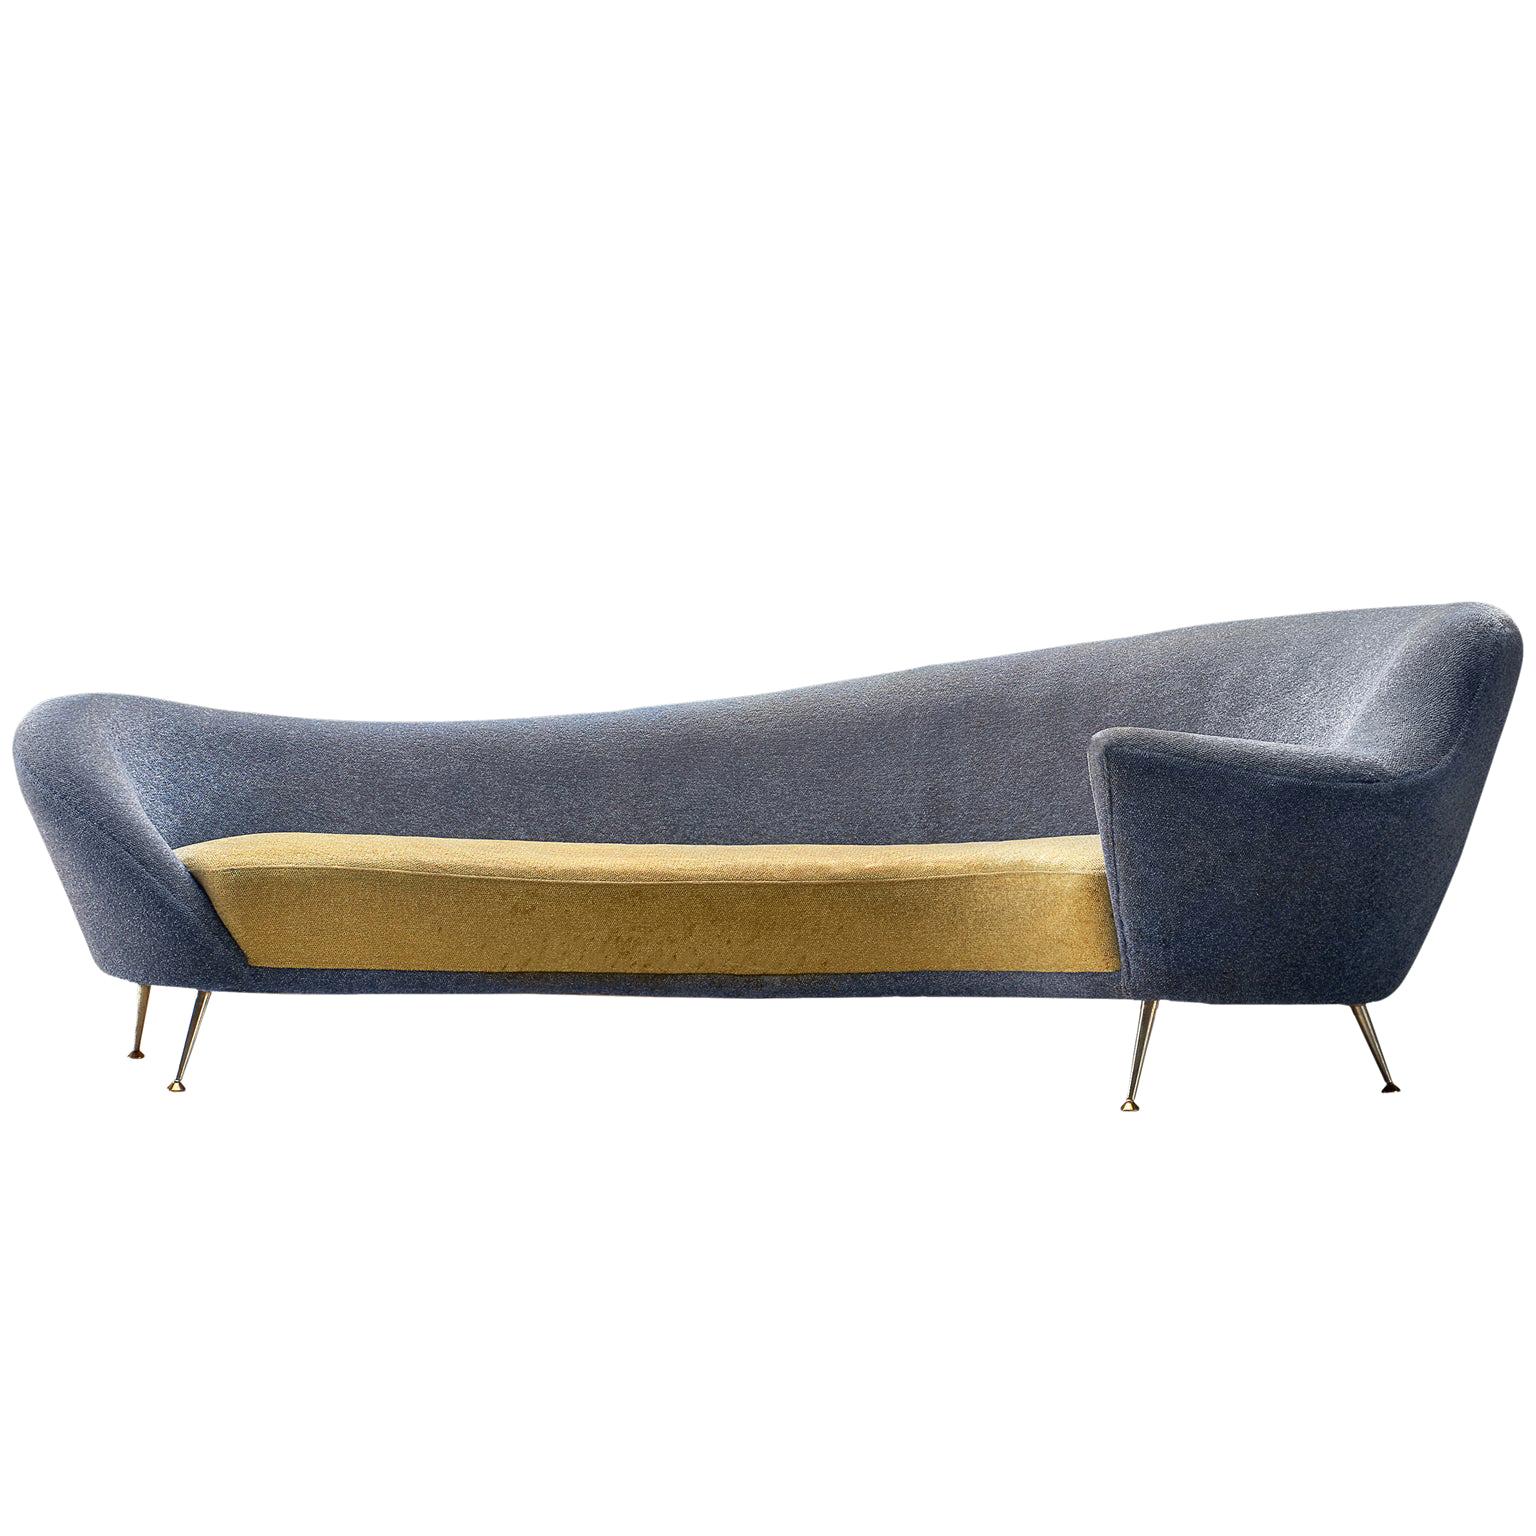 Italian Curved Sofa in Two-Tone Upholstery